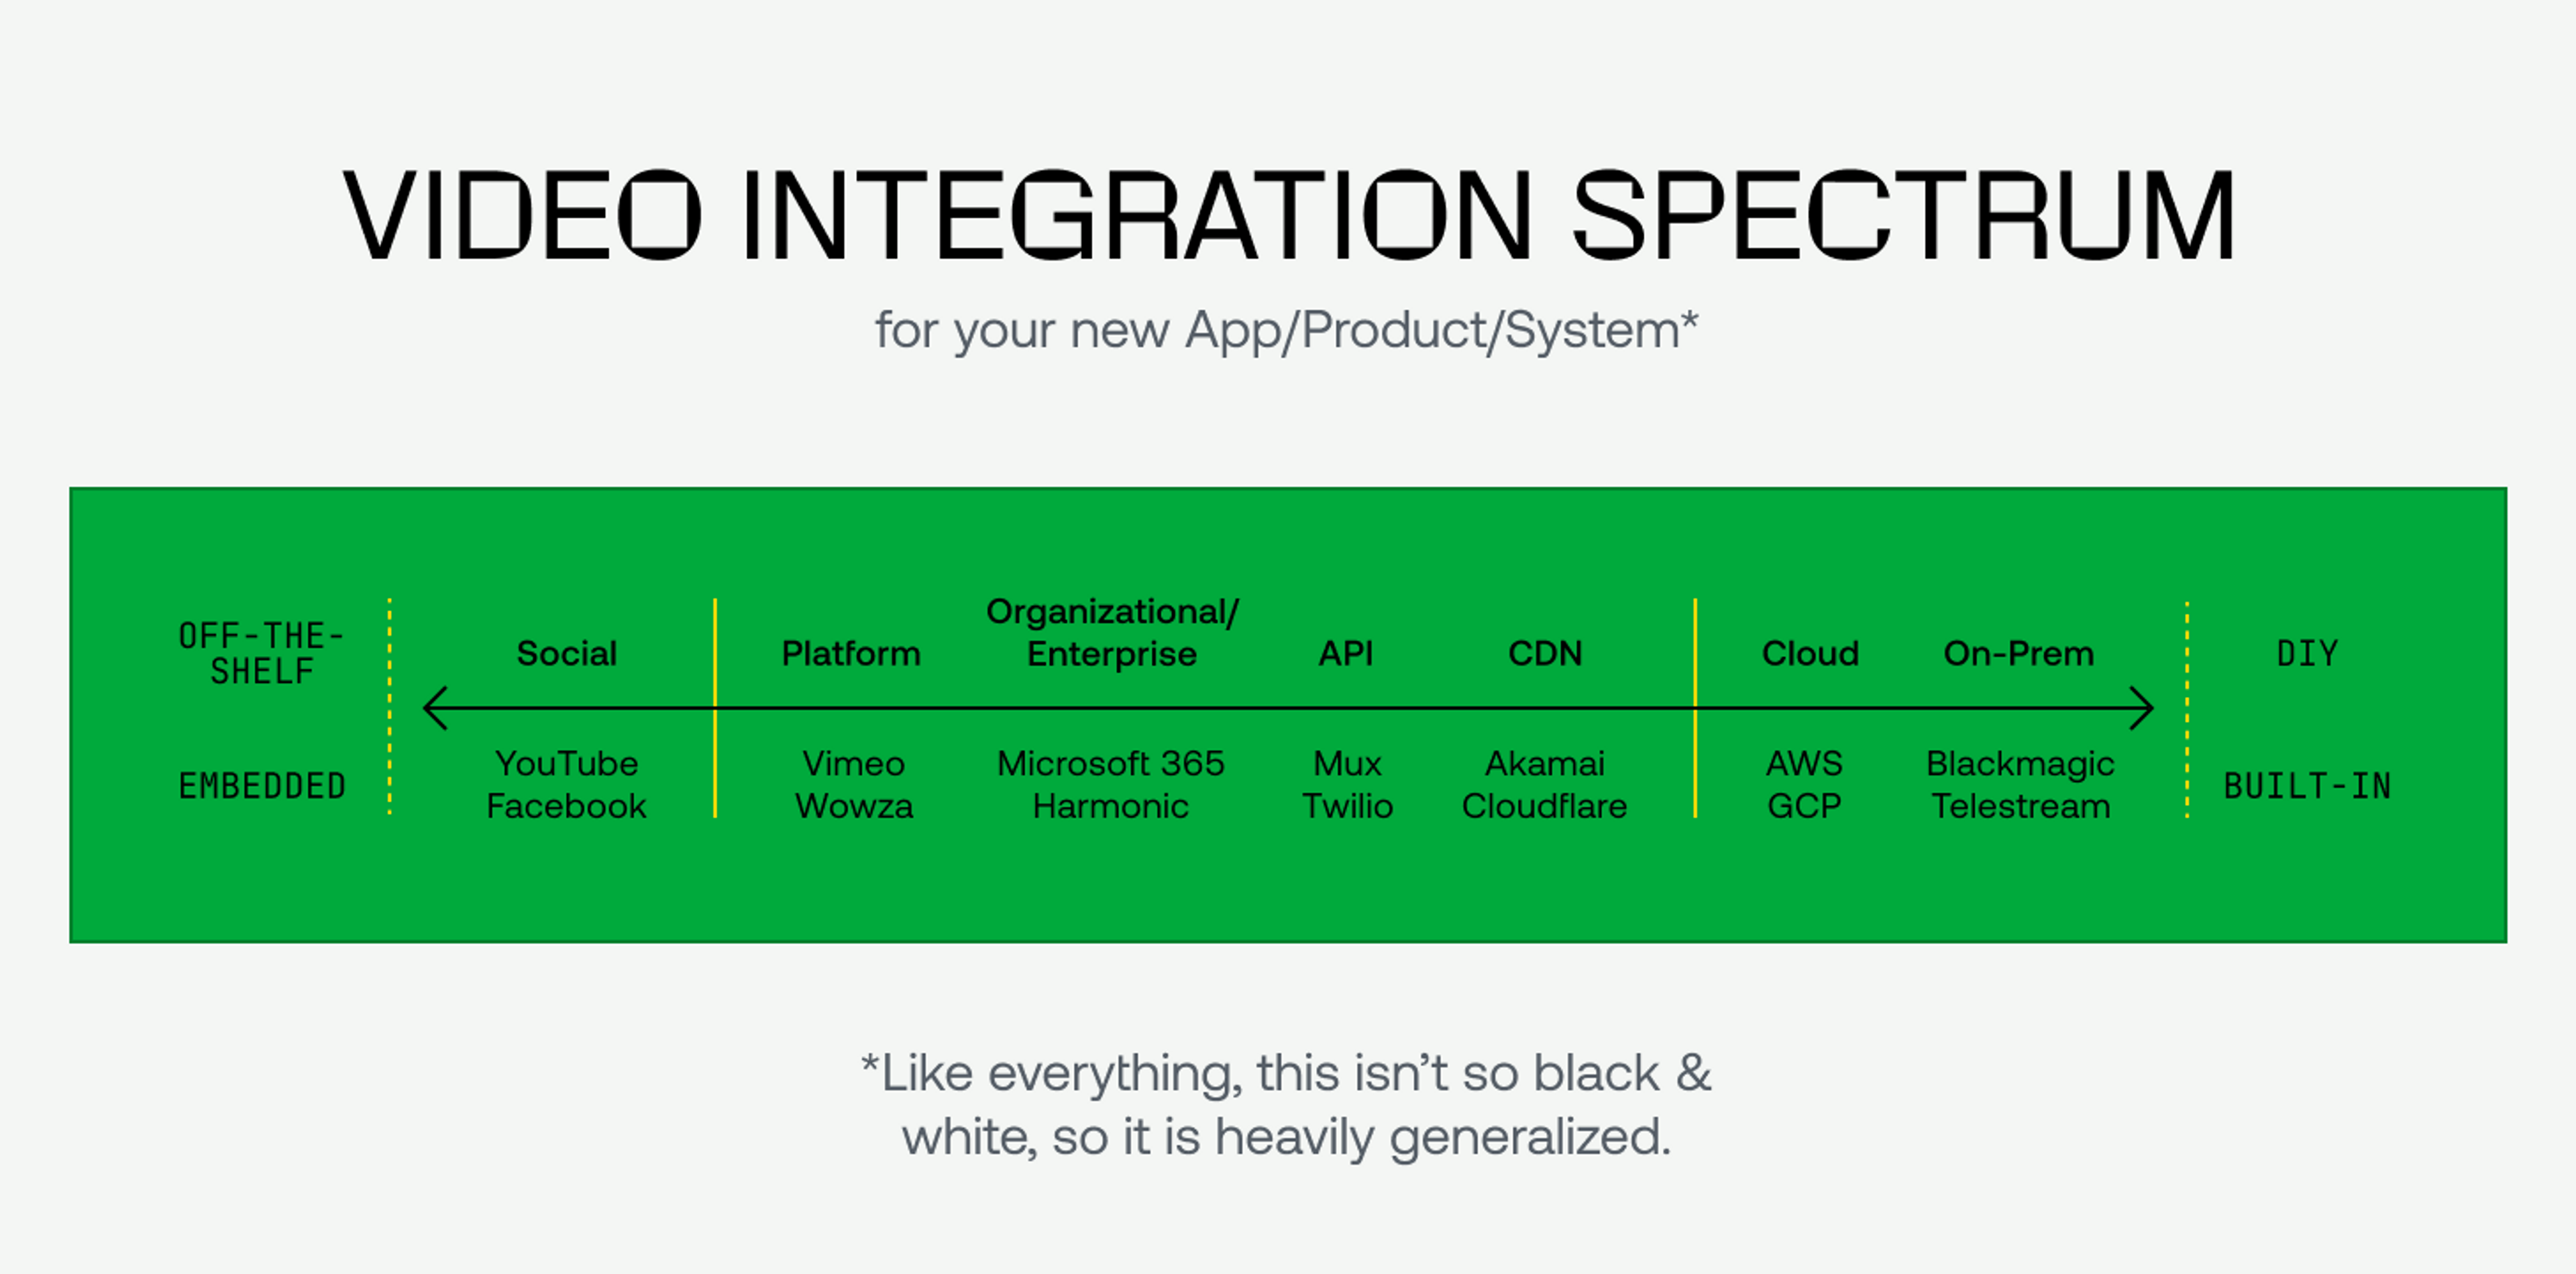 A spectrum of choices for integrating video into your application